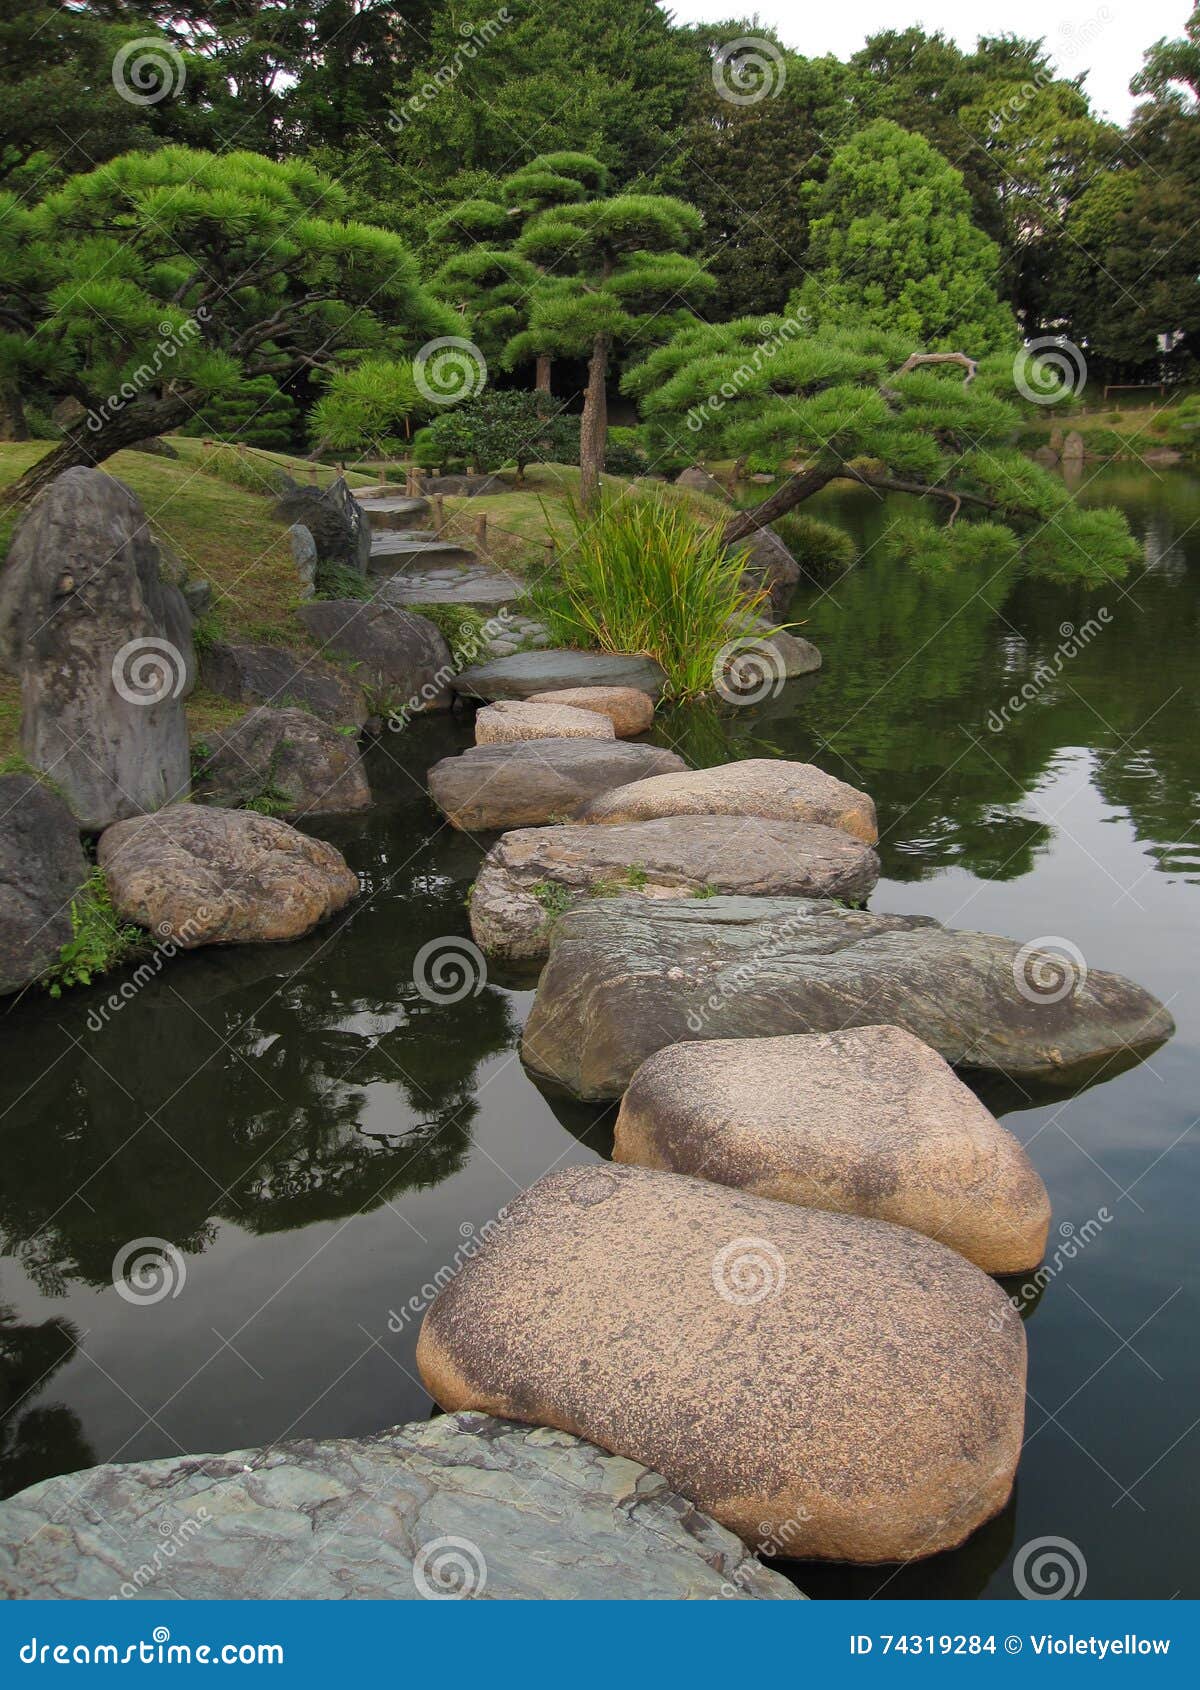 traditional japanese garden with stepping stone pathways